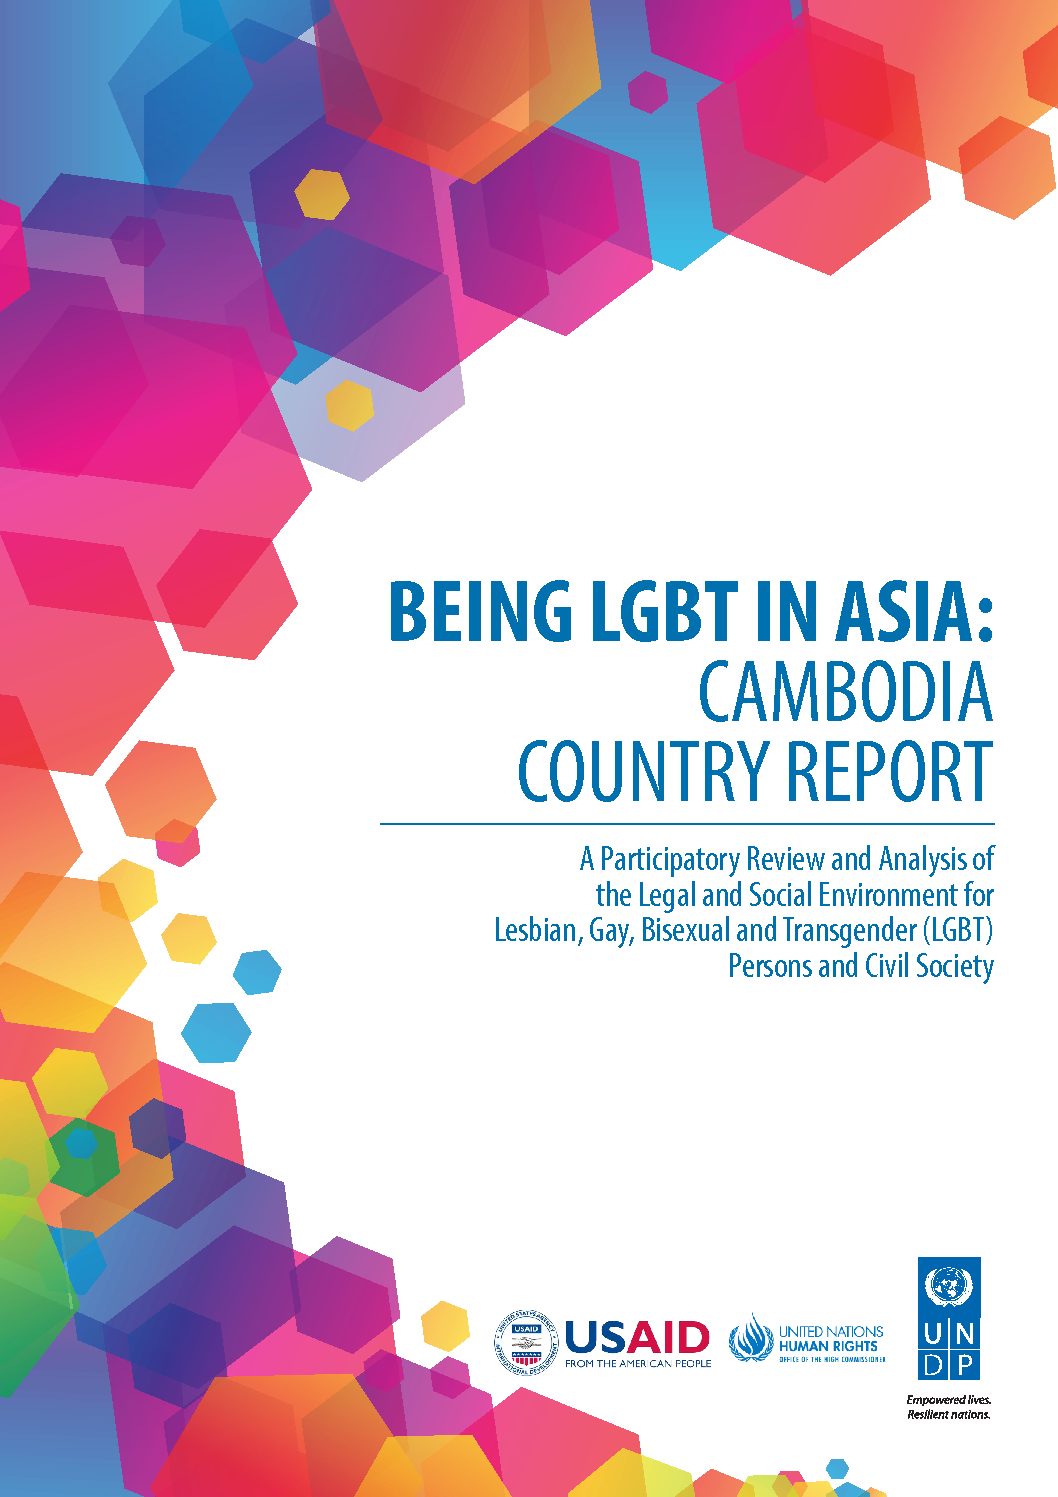 Being LGBT in Asia: Cambodia Country Report